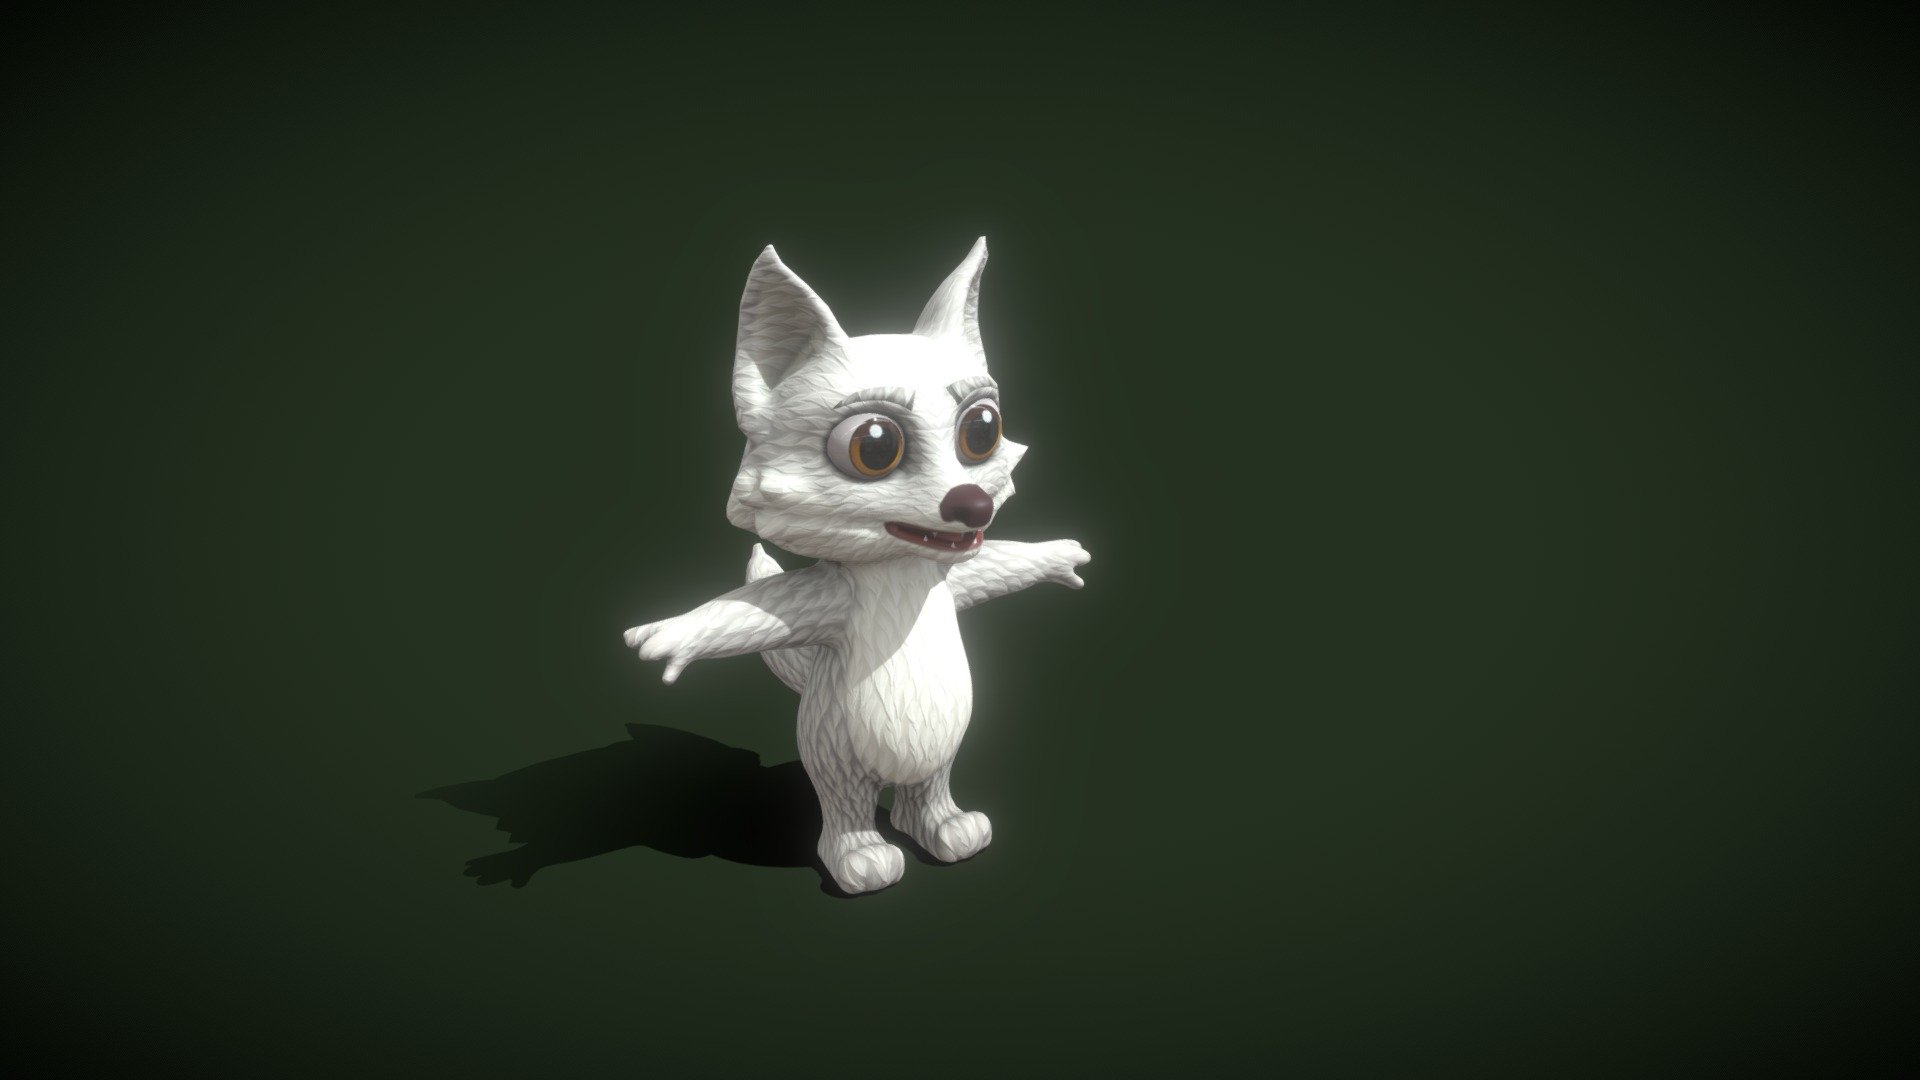 Cartoon Arctic Fox Rigged 3D Model is completely ready to be used in your games, animations, films, designs etc.  

All textures and materials are included and mapped in every format. The model is completely ready for visualization in any 3d software and engine.  

Technical details:  


File formats included in the package are: FBX, OBJ, GLB, ABC, DAE, PLY, STL, BLEND, gLTF (generated), USDZ (generated)
Native software file format: BLEND
Render engine: Eevee
Polygons: 10,284
Vertices: 9,863
Textures: Color, Metallic, Roughness, Normal, AO
All textures are 2k resolution
The model is rigged
We have another model with animations
Only following formats contain rig: BLEND, FBX, GLTF/GLB
 - Cartoon Arctic Fox Rigged 3D Model - Buy Royalty Free 3D model by 3DDisco 3d model